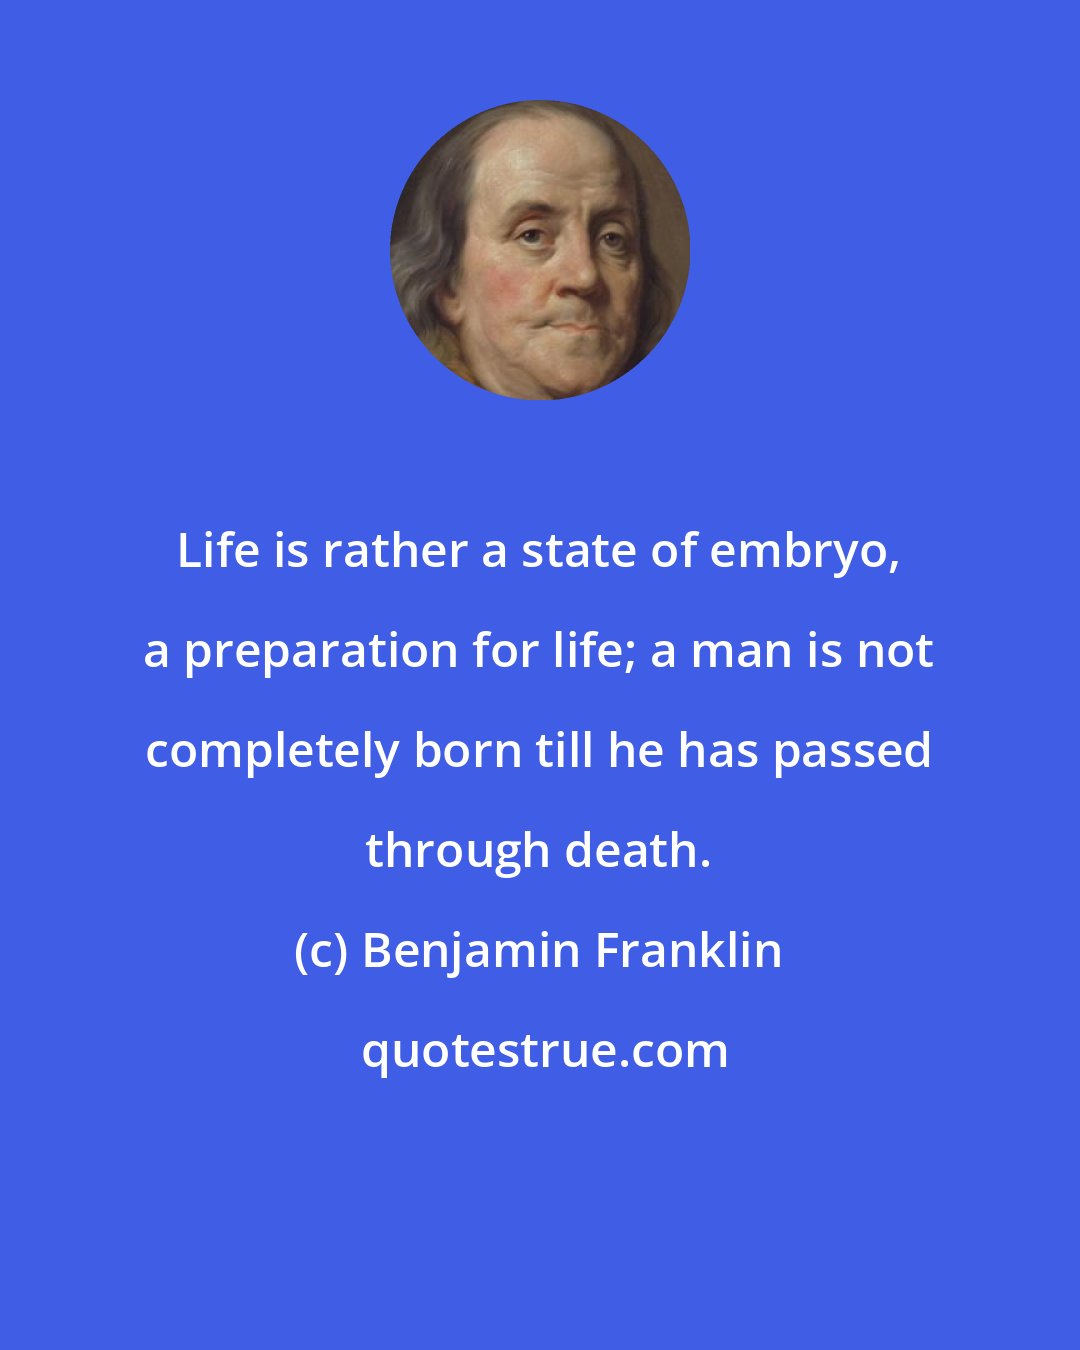 Benjamin Franklin: Life is rather a state of embryo, a preparation for life; a man is not completely born till he has passed through death.